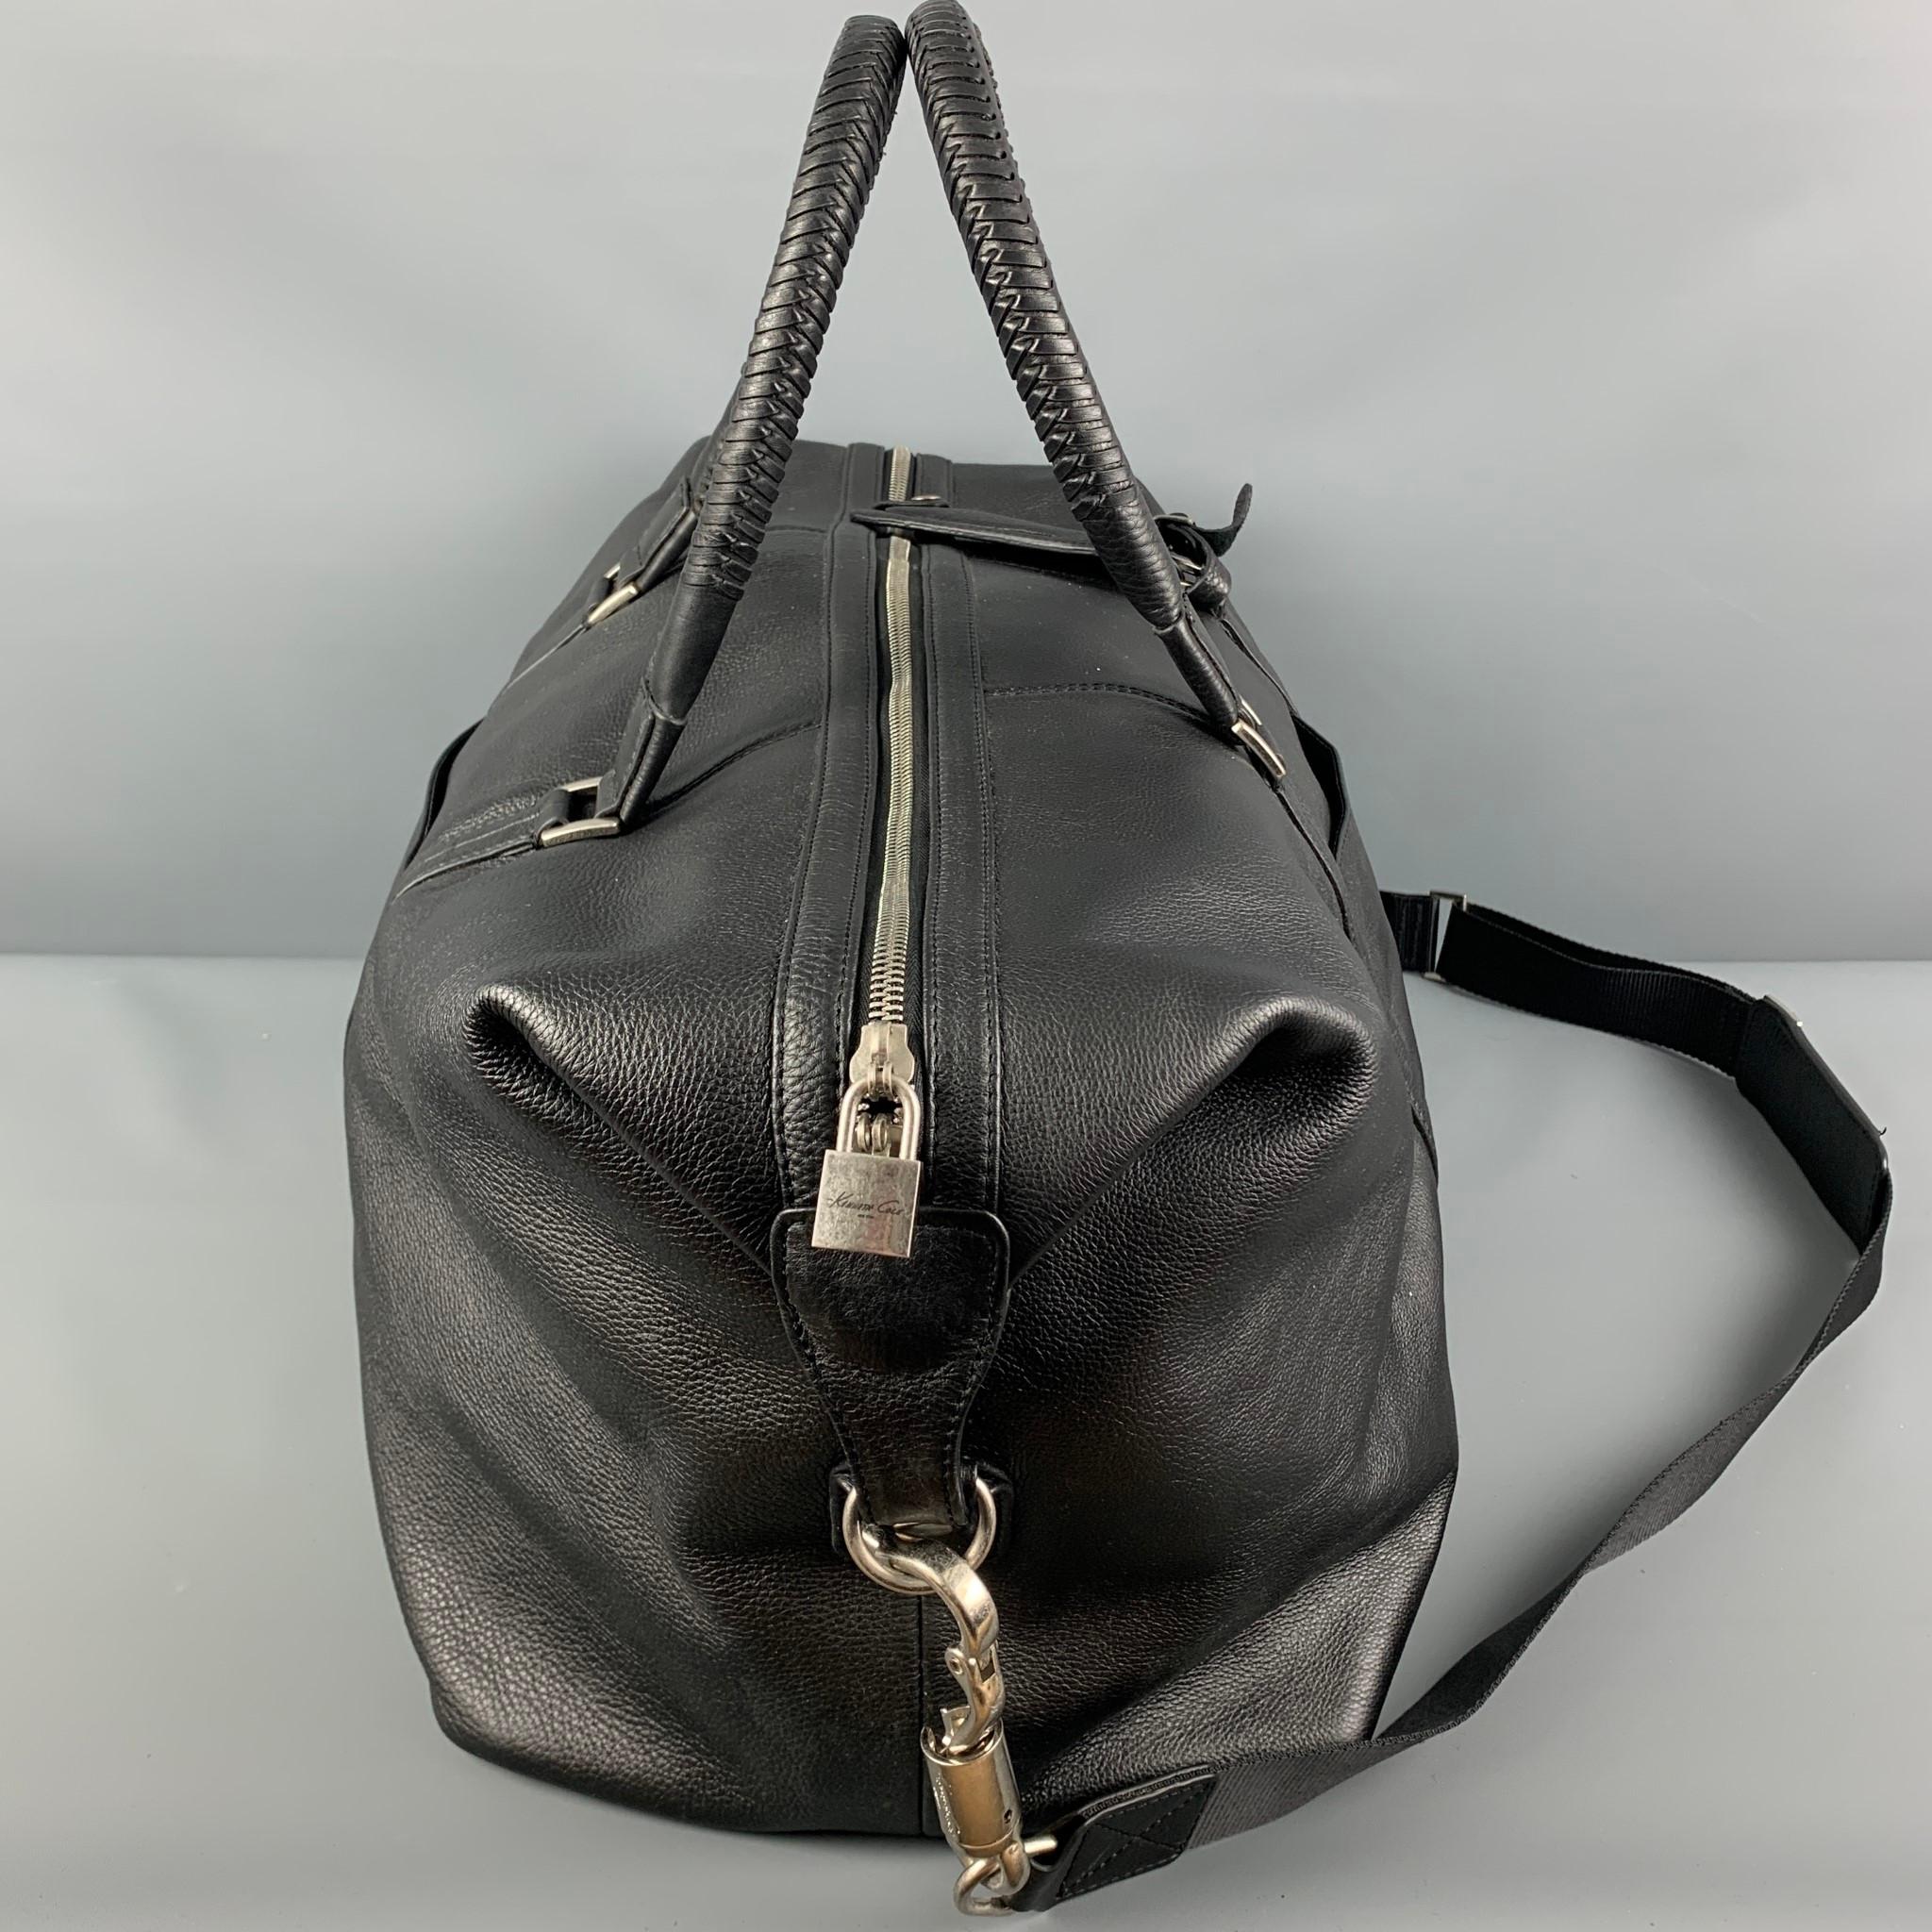 KENNETH COLE bag comes in a black leather featuring a duffle style, top handles, detachable strap, silver tone hardware, and a top zipper closure. 

Good Pre-Owned Condition. Light wear. As-Is.

Measurements:

Length: 20 in.
Width: 9.5 in.
Height: